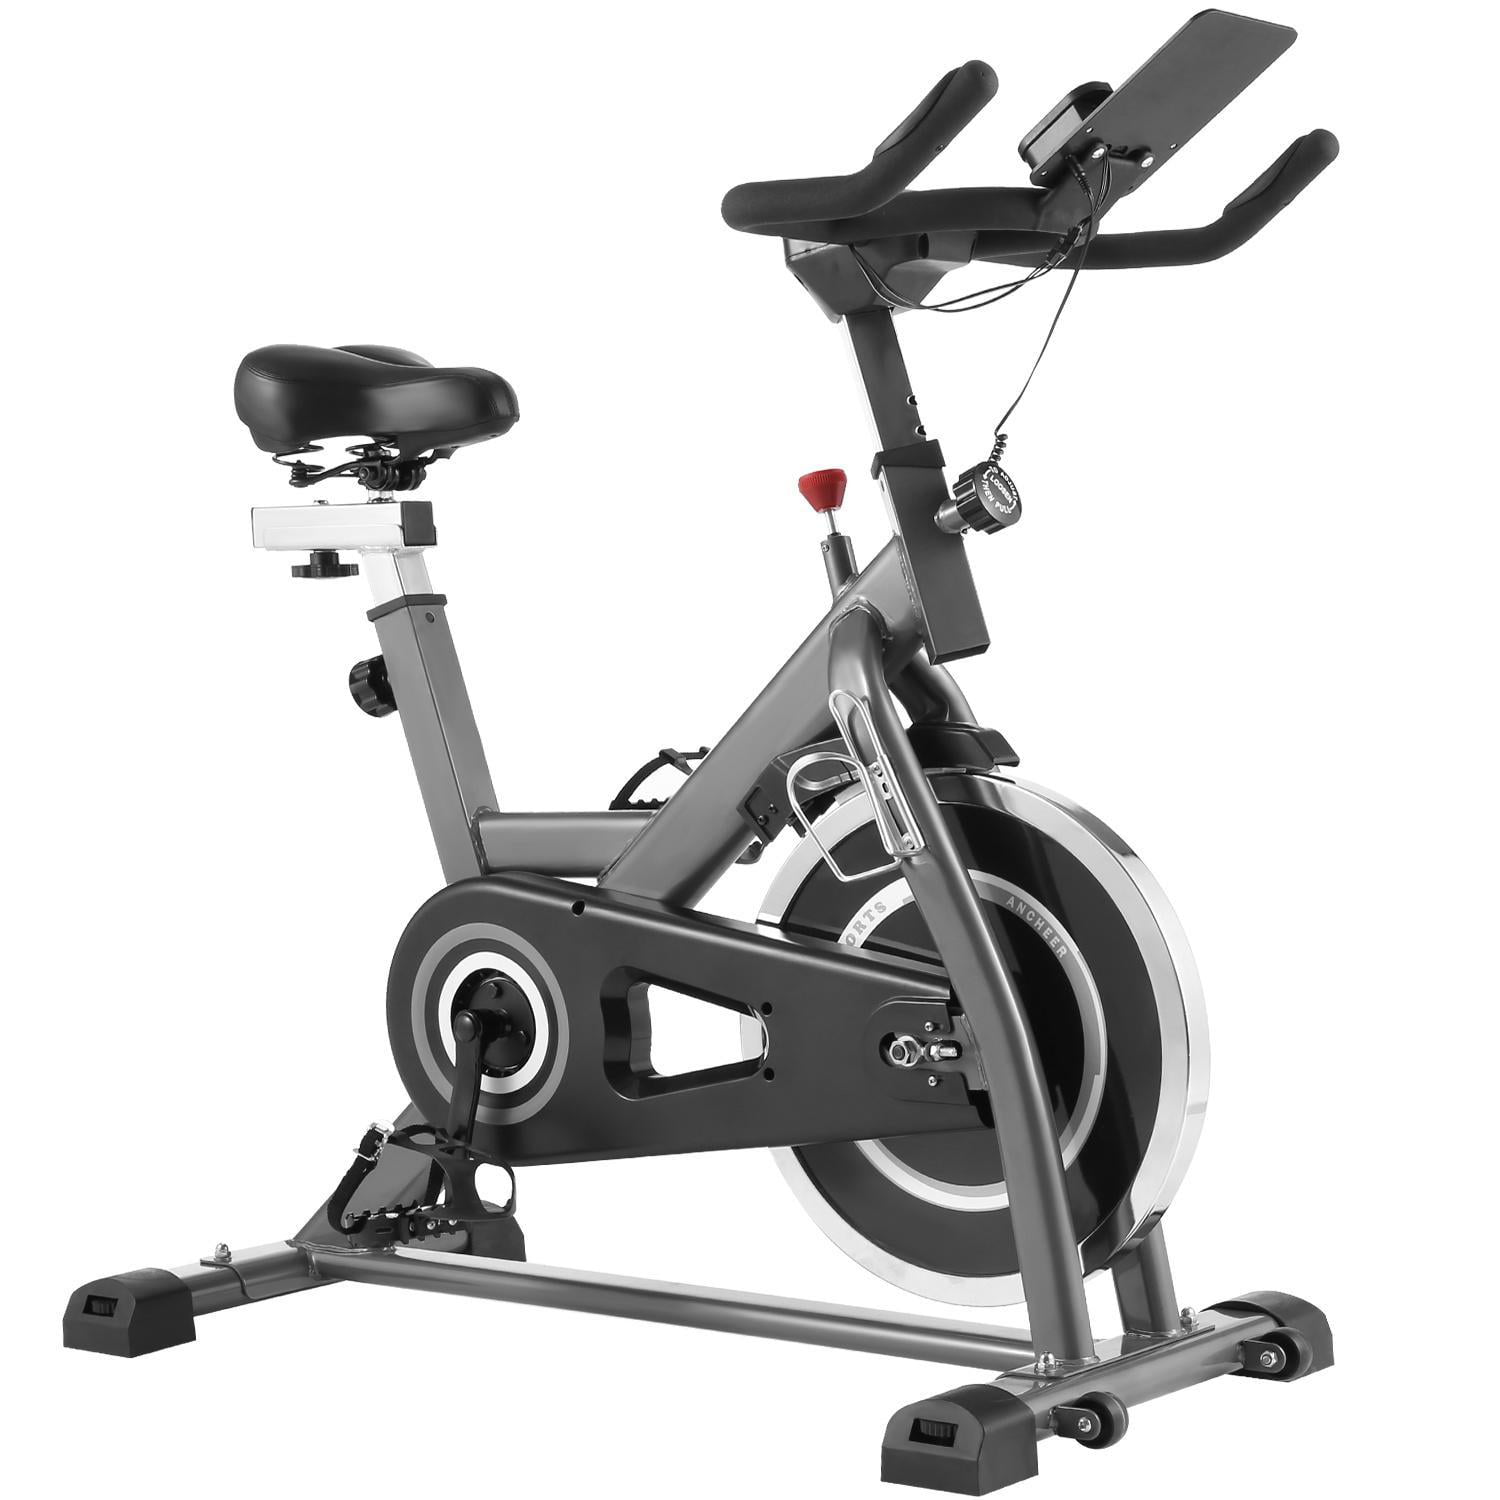 Details about   Stationary Exercise Bike Bicycle Trainer Fitness Cardio Cycling Training Home U# 